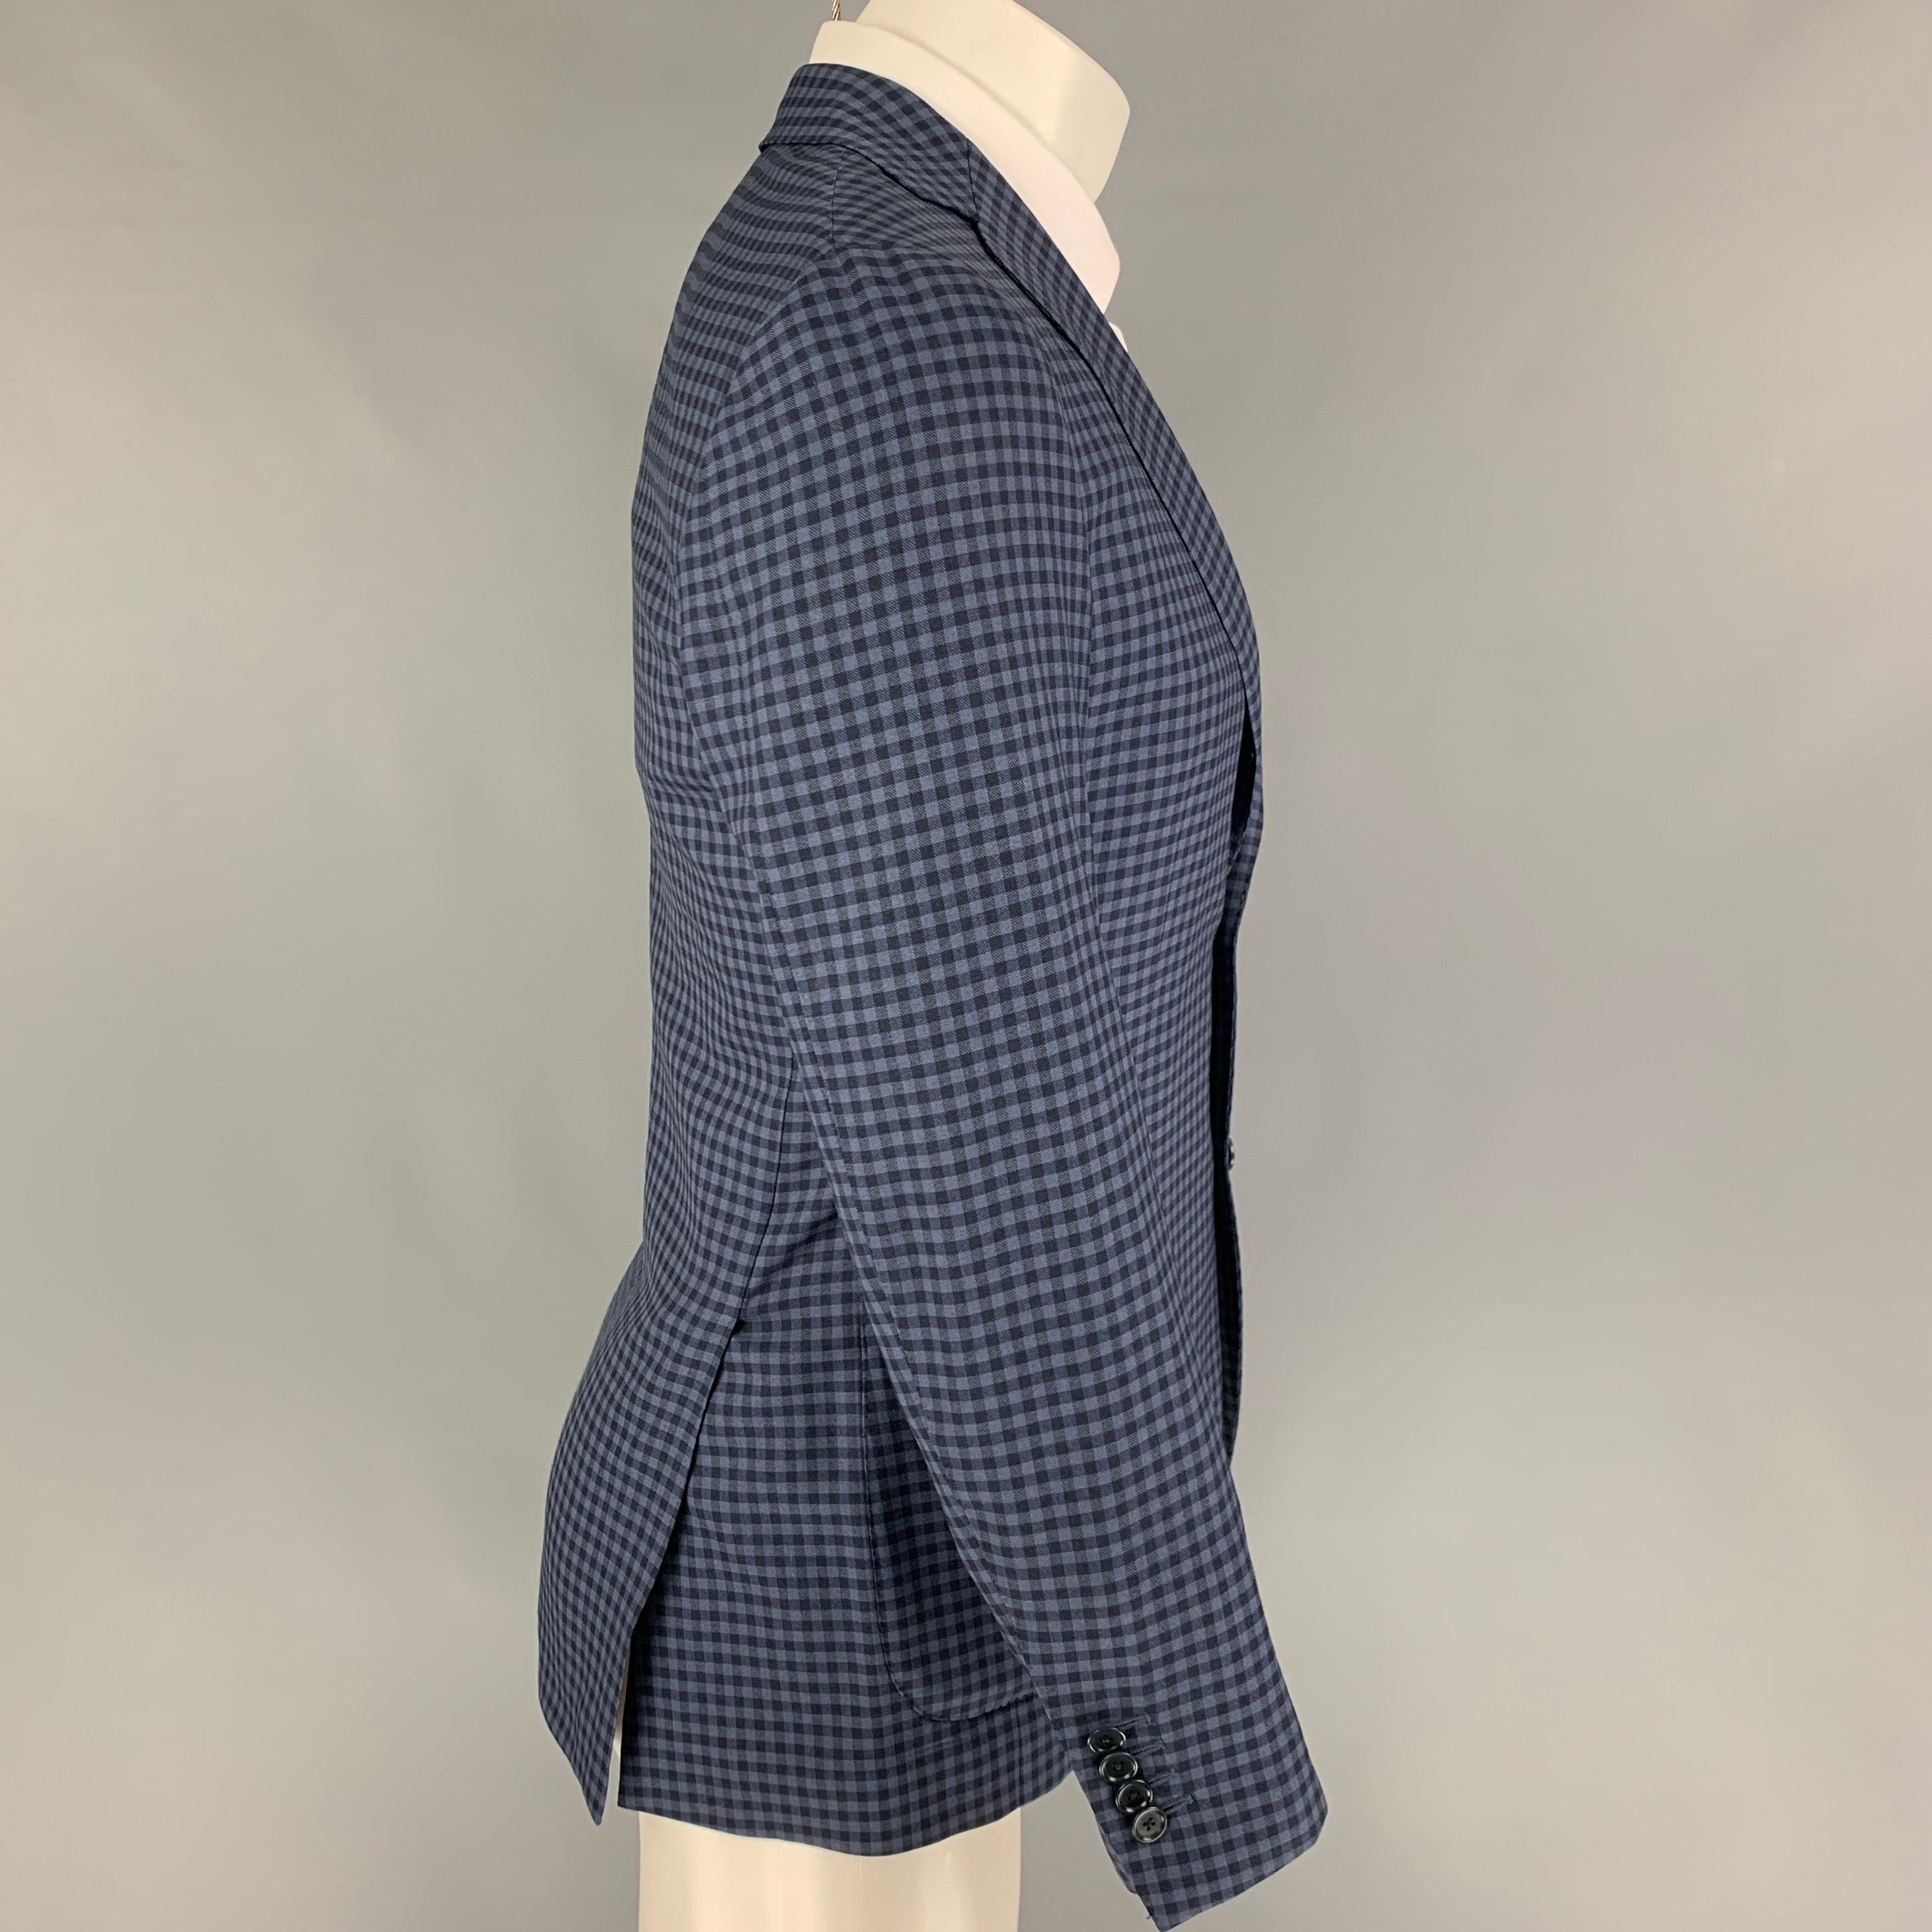 BEAMS sport coat comes in a nav & blue checkered wool with a half liner featuring a notch lapel, patch pockets, double back vent, and a three button closure. Made in Japan. 

Very Good Pre-Owned Condition.
Marked: 93

Measurements:

Shoulder: 16.5